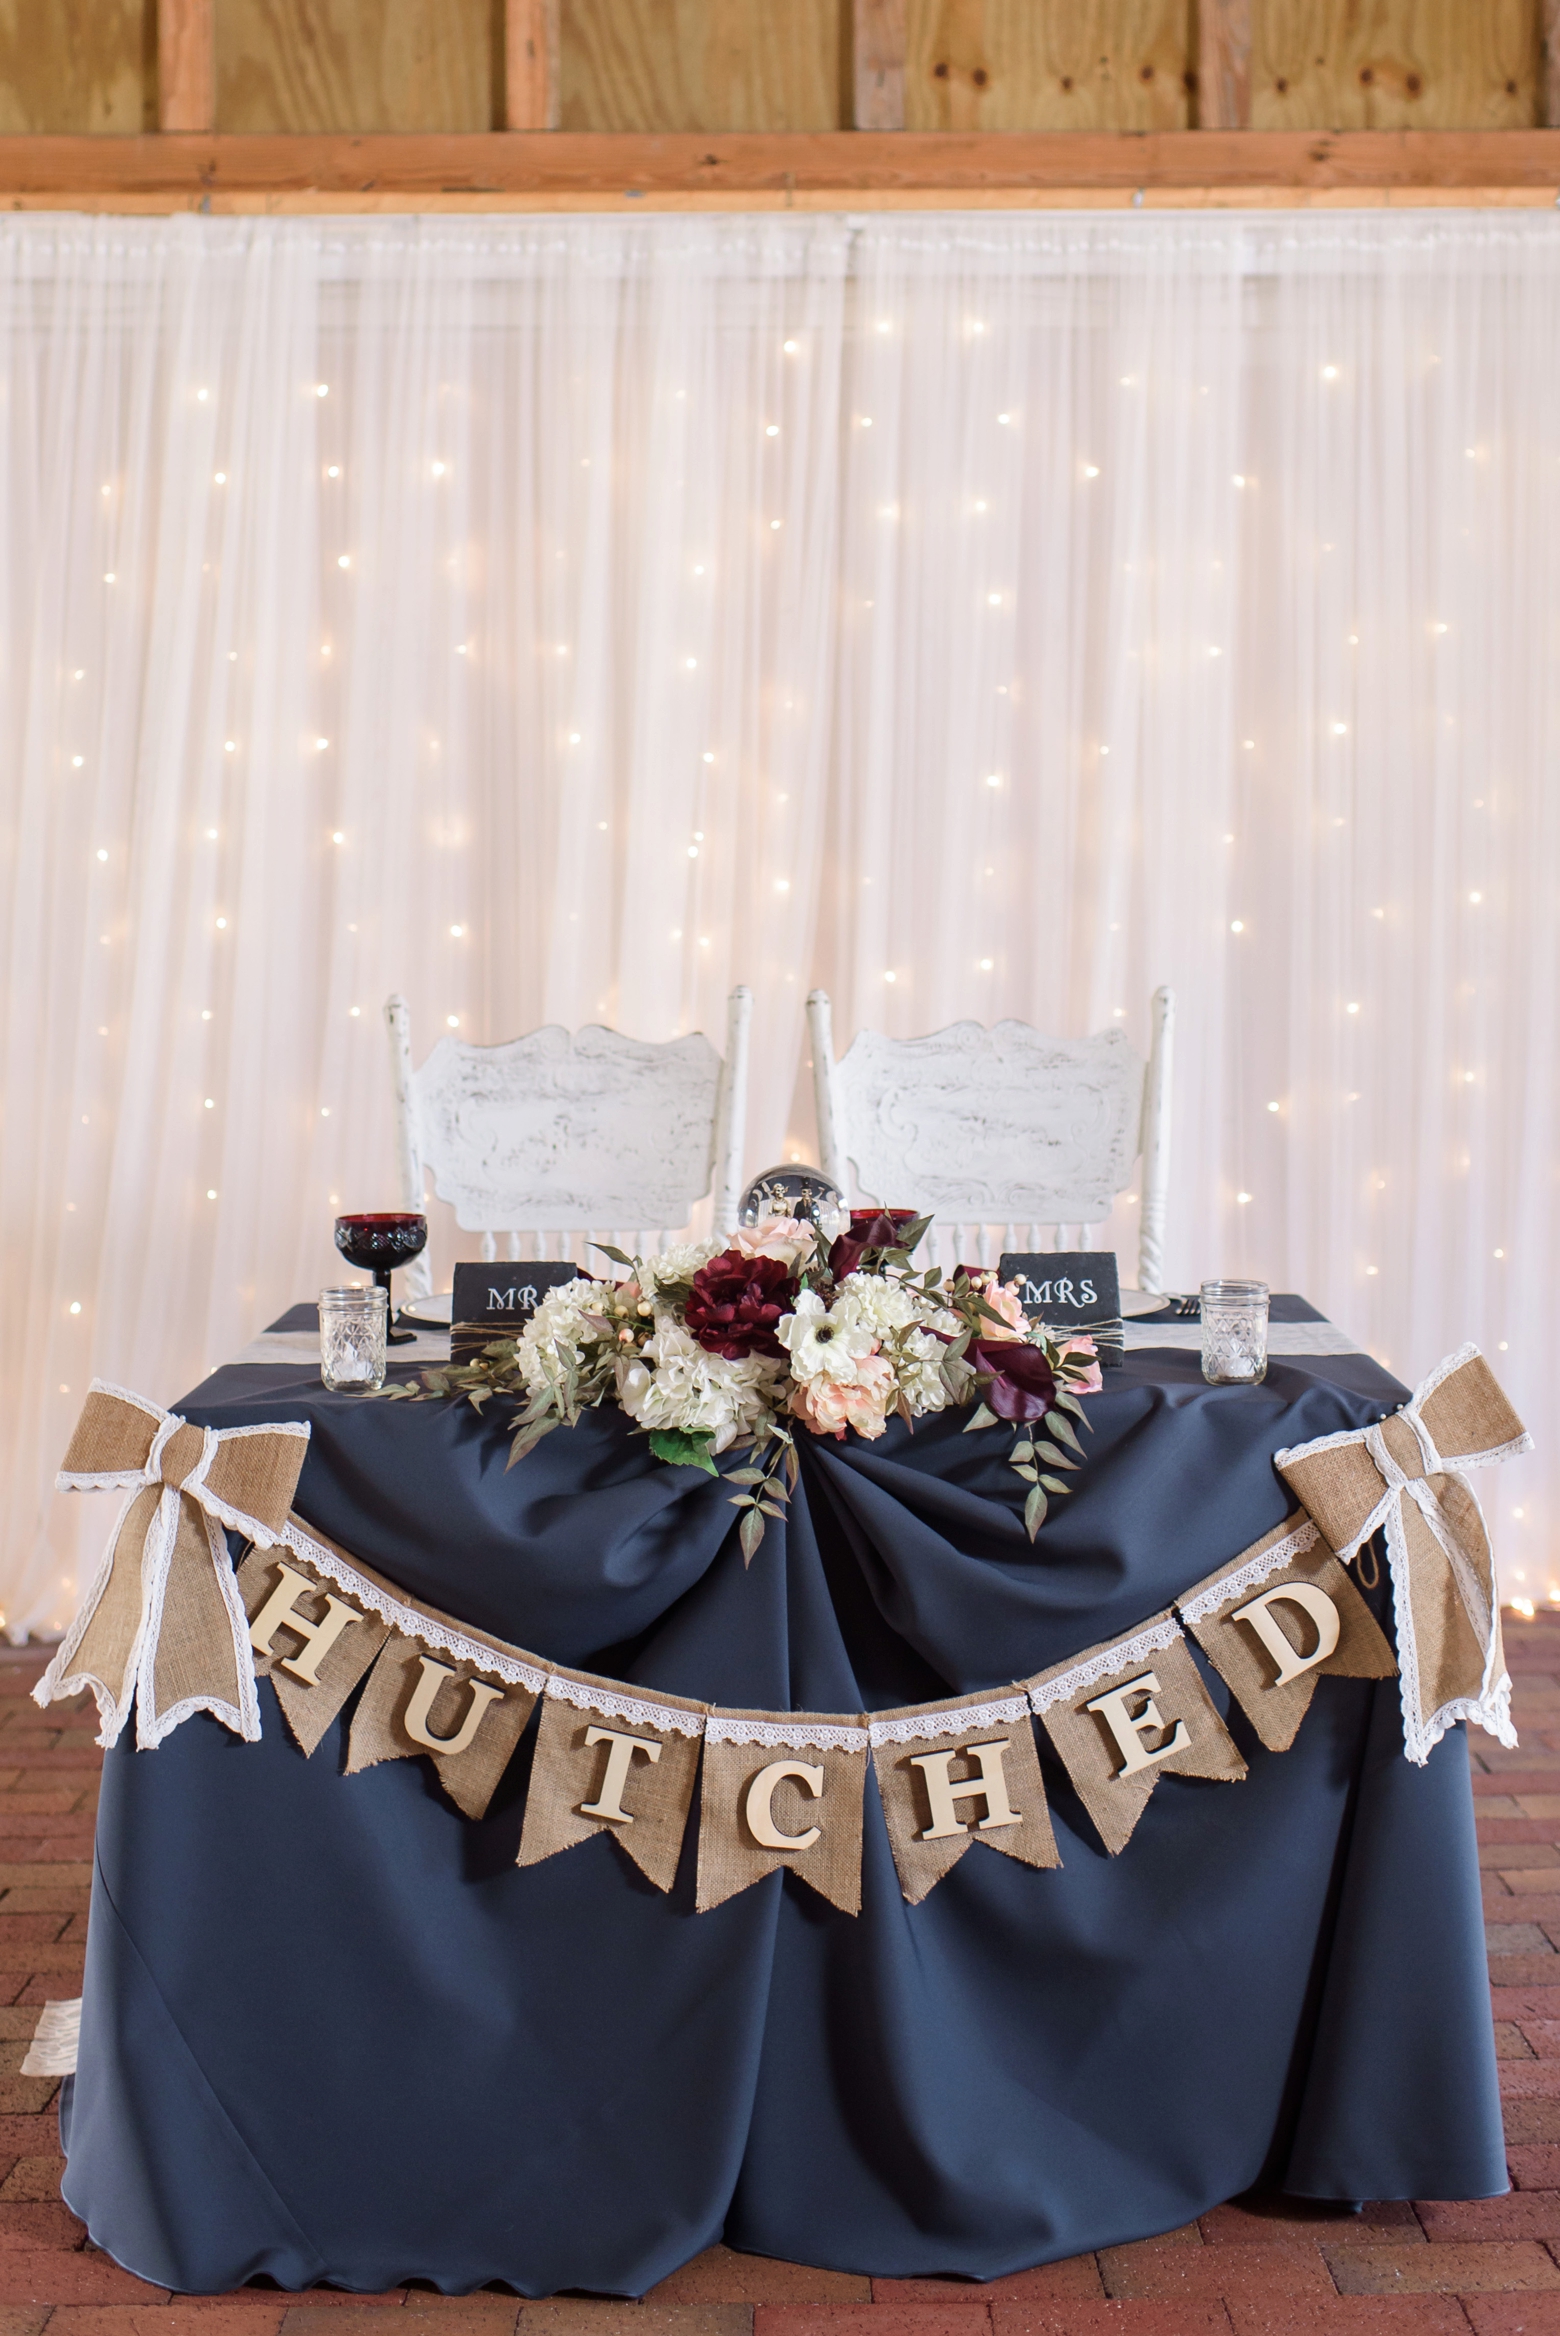 The head table decorated with a banner and large floral arrangement in front of twinkle lights